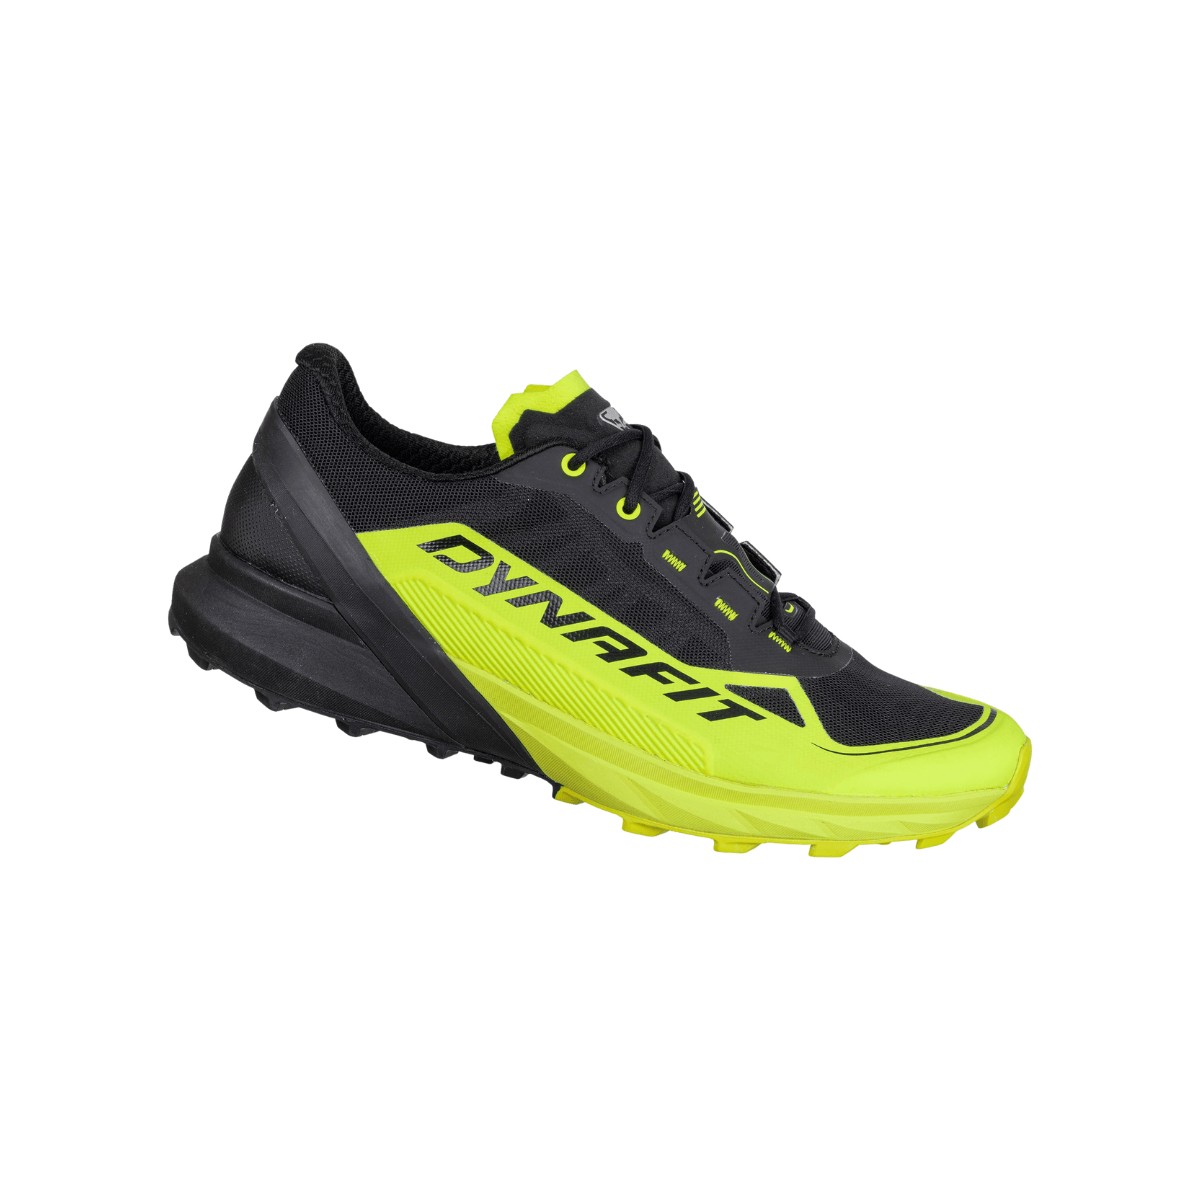 Chaussures Dynafit Ultra 50 Noir Jaune AW22, Taille 44 - EUR